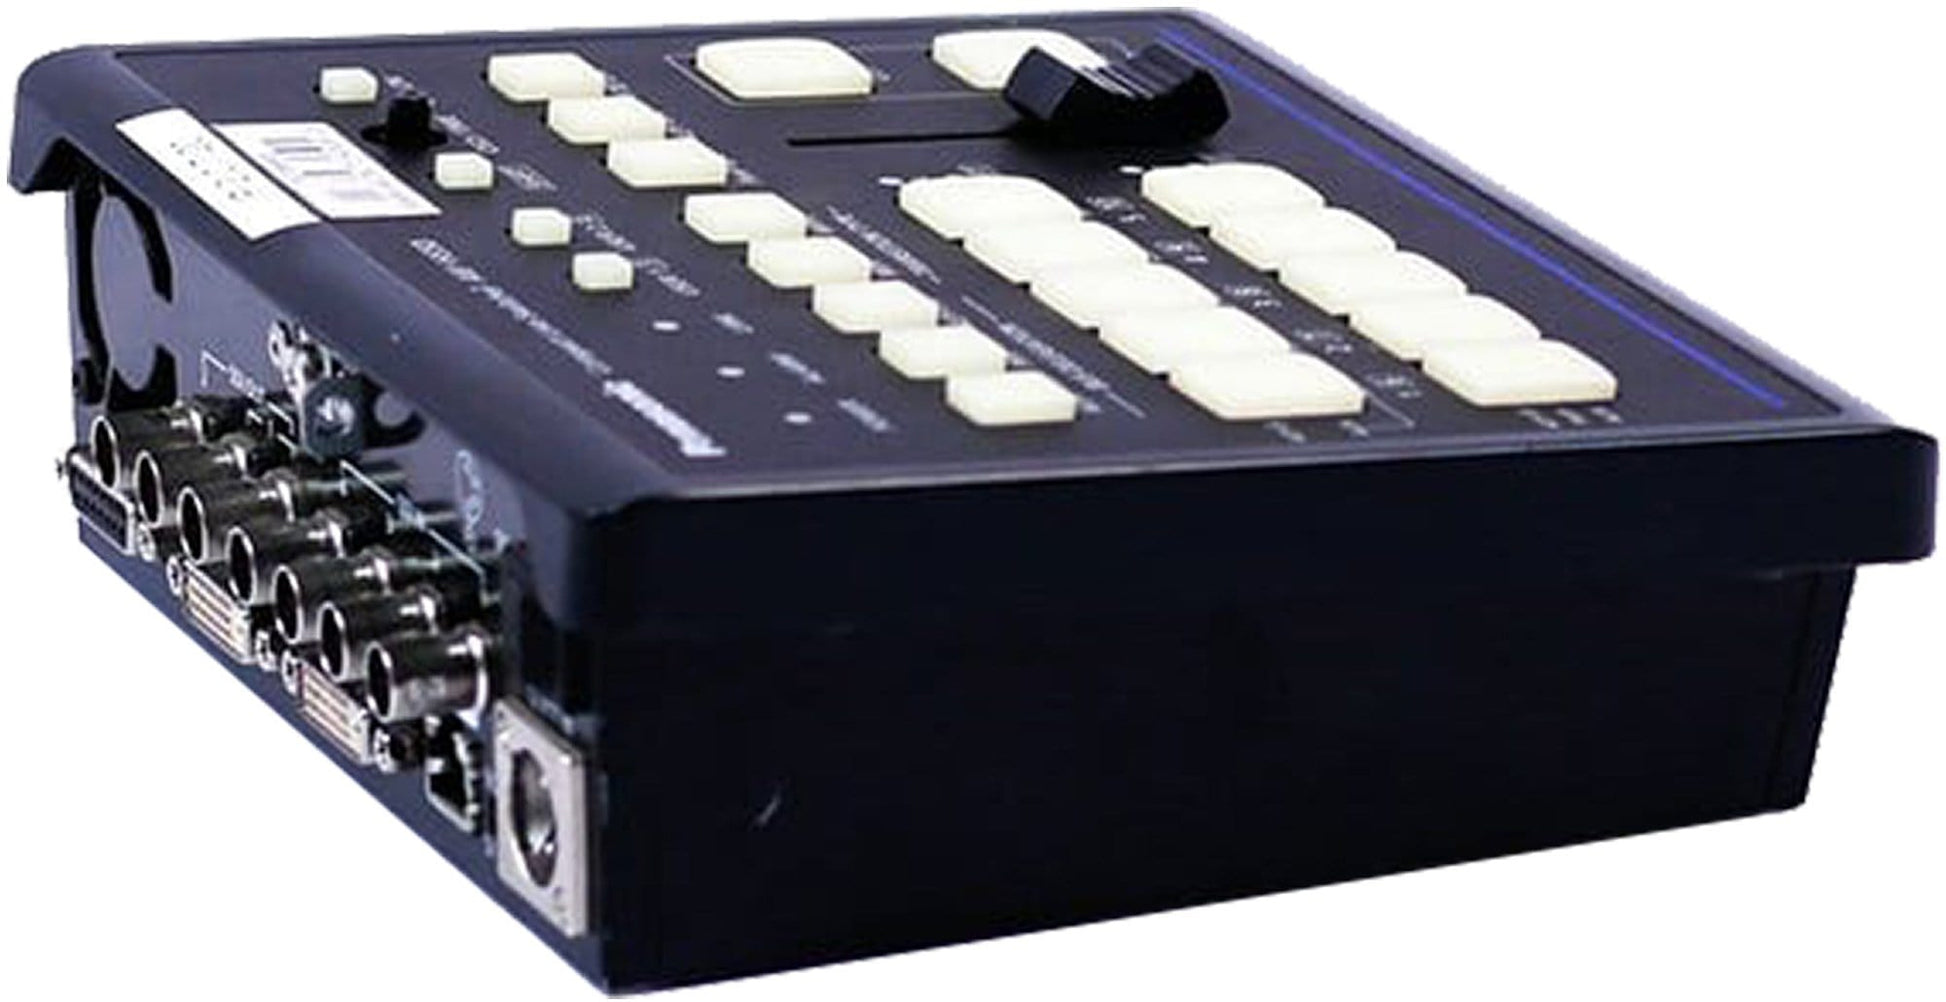 Panasonic AW-HS50N HD 4 In 2 Out Compact Switcher - ProSound and Stage Lighting